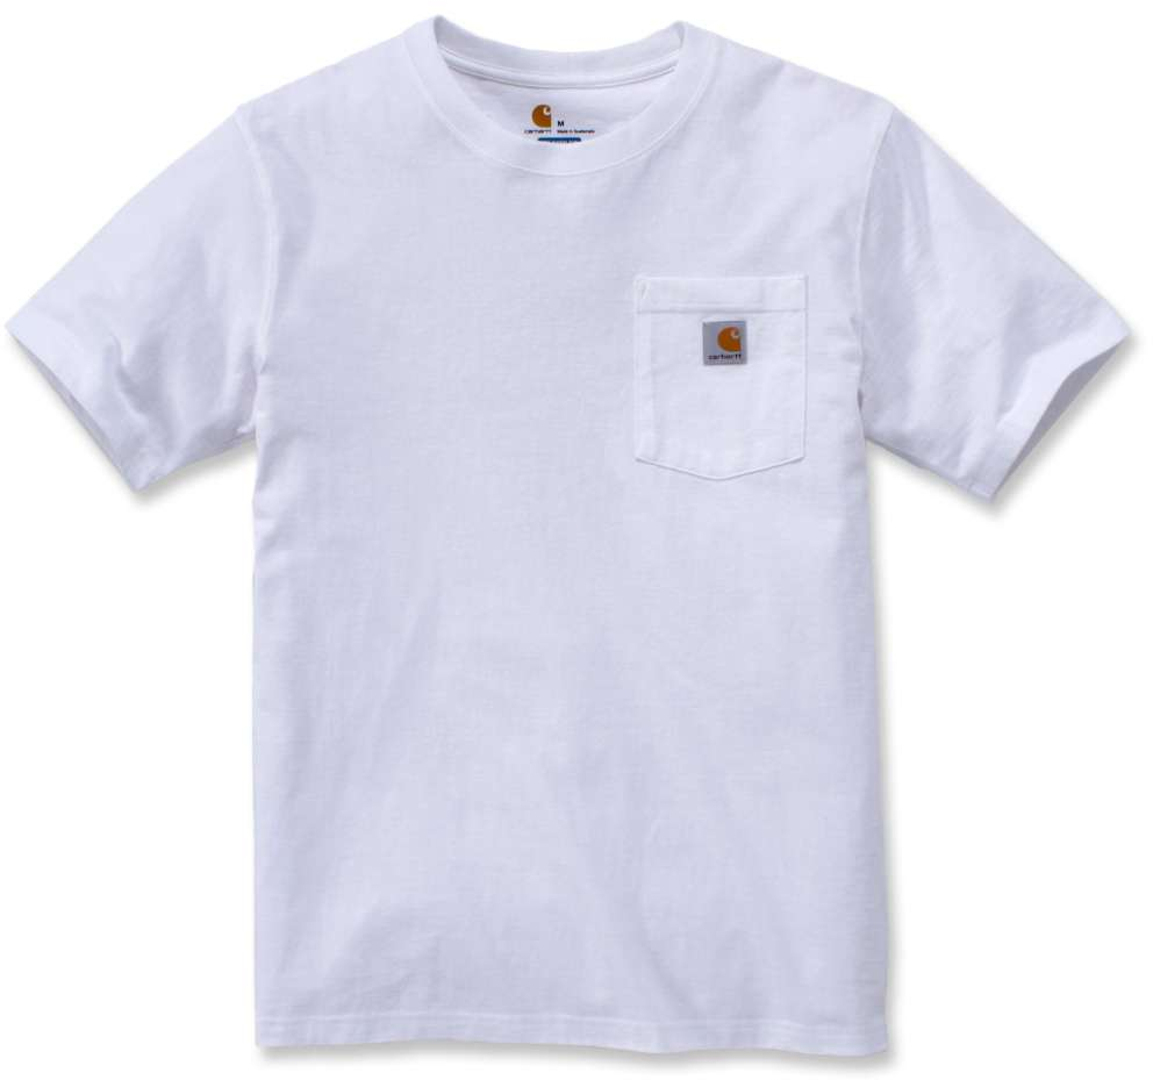 WORKW POCKET T-SHIRT S/S white